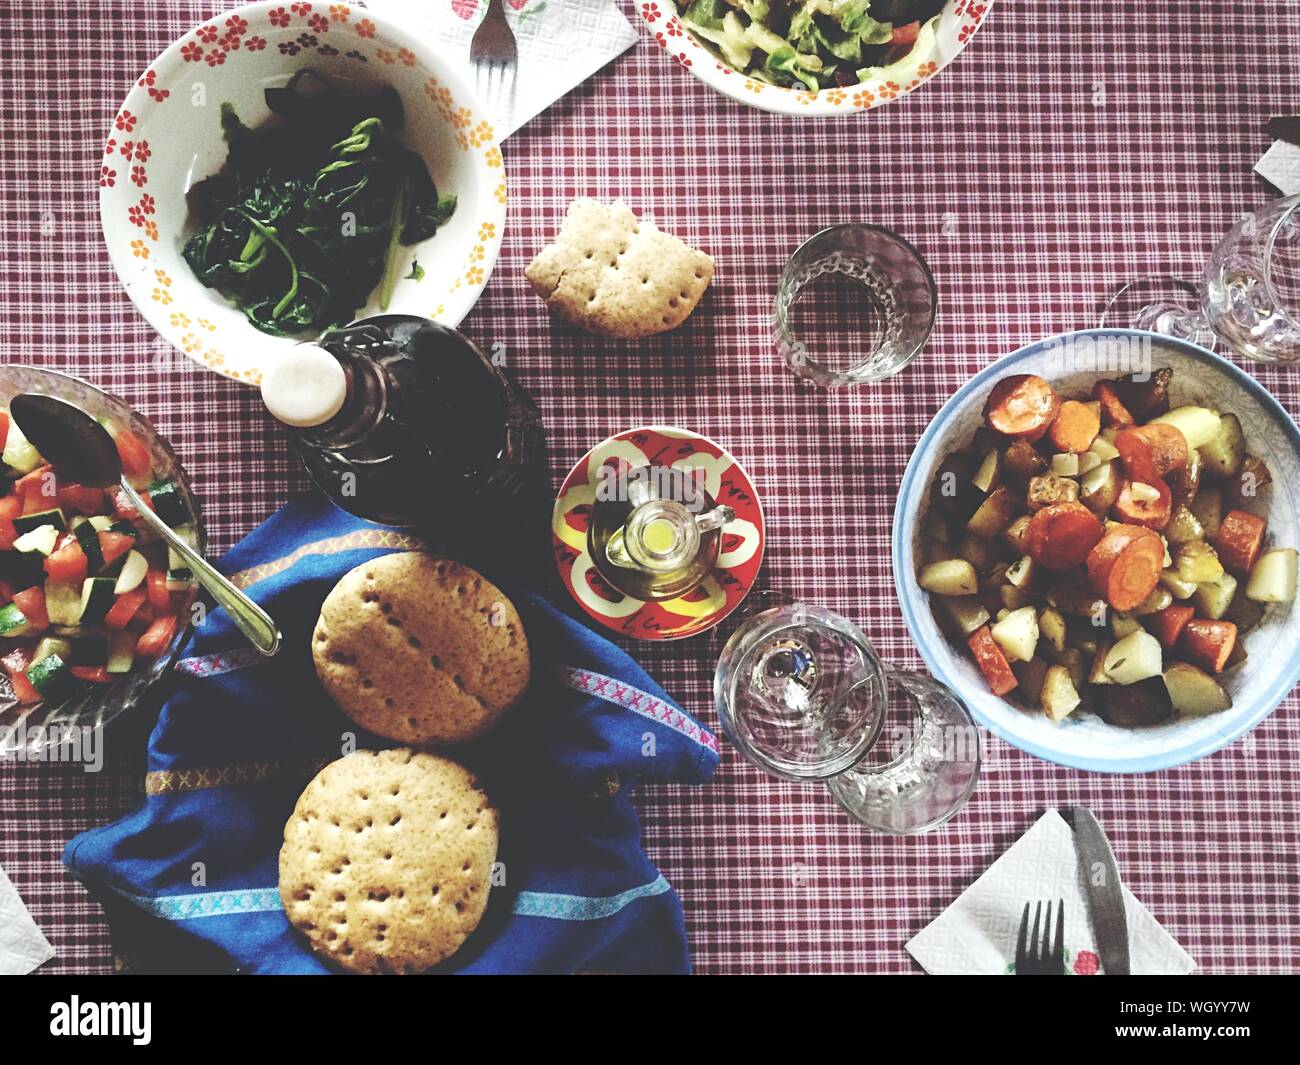 Directly Above View Of Salad And Biscuits With Tablewear On Checkered Tablecloth Stock Photo